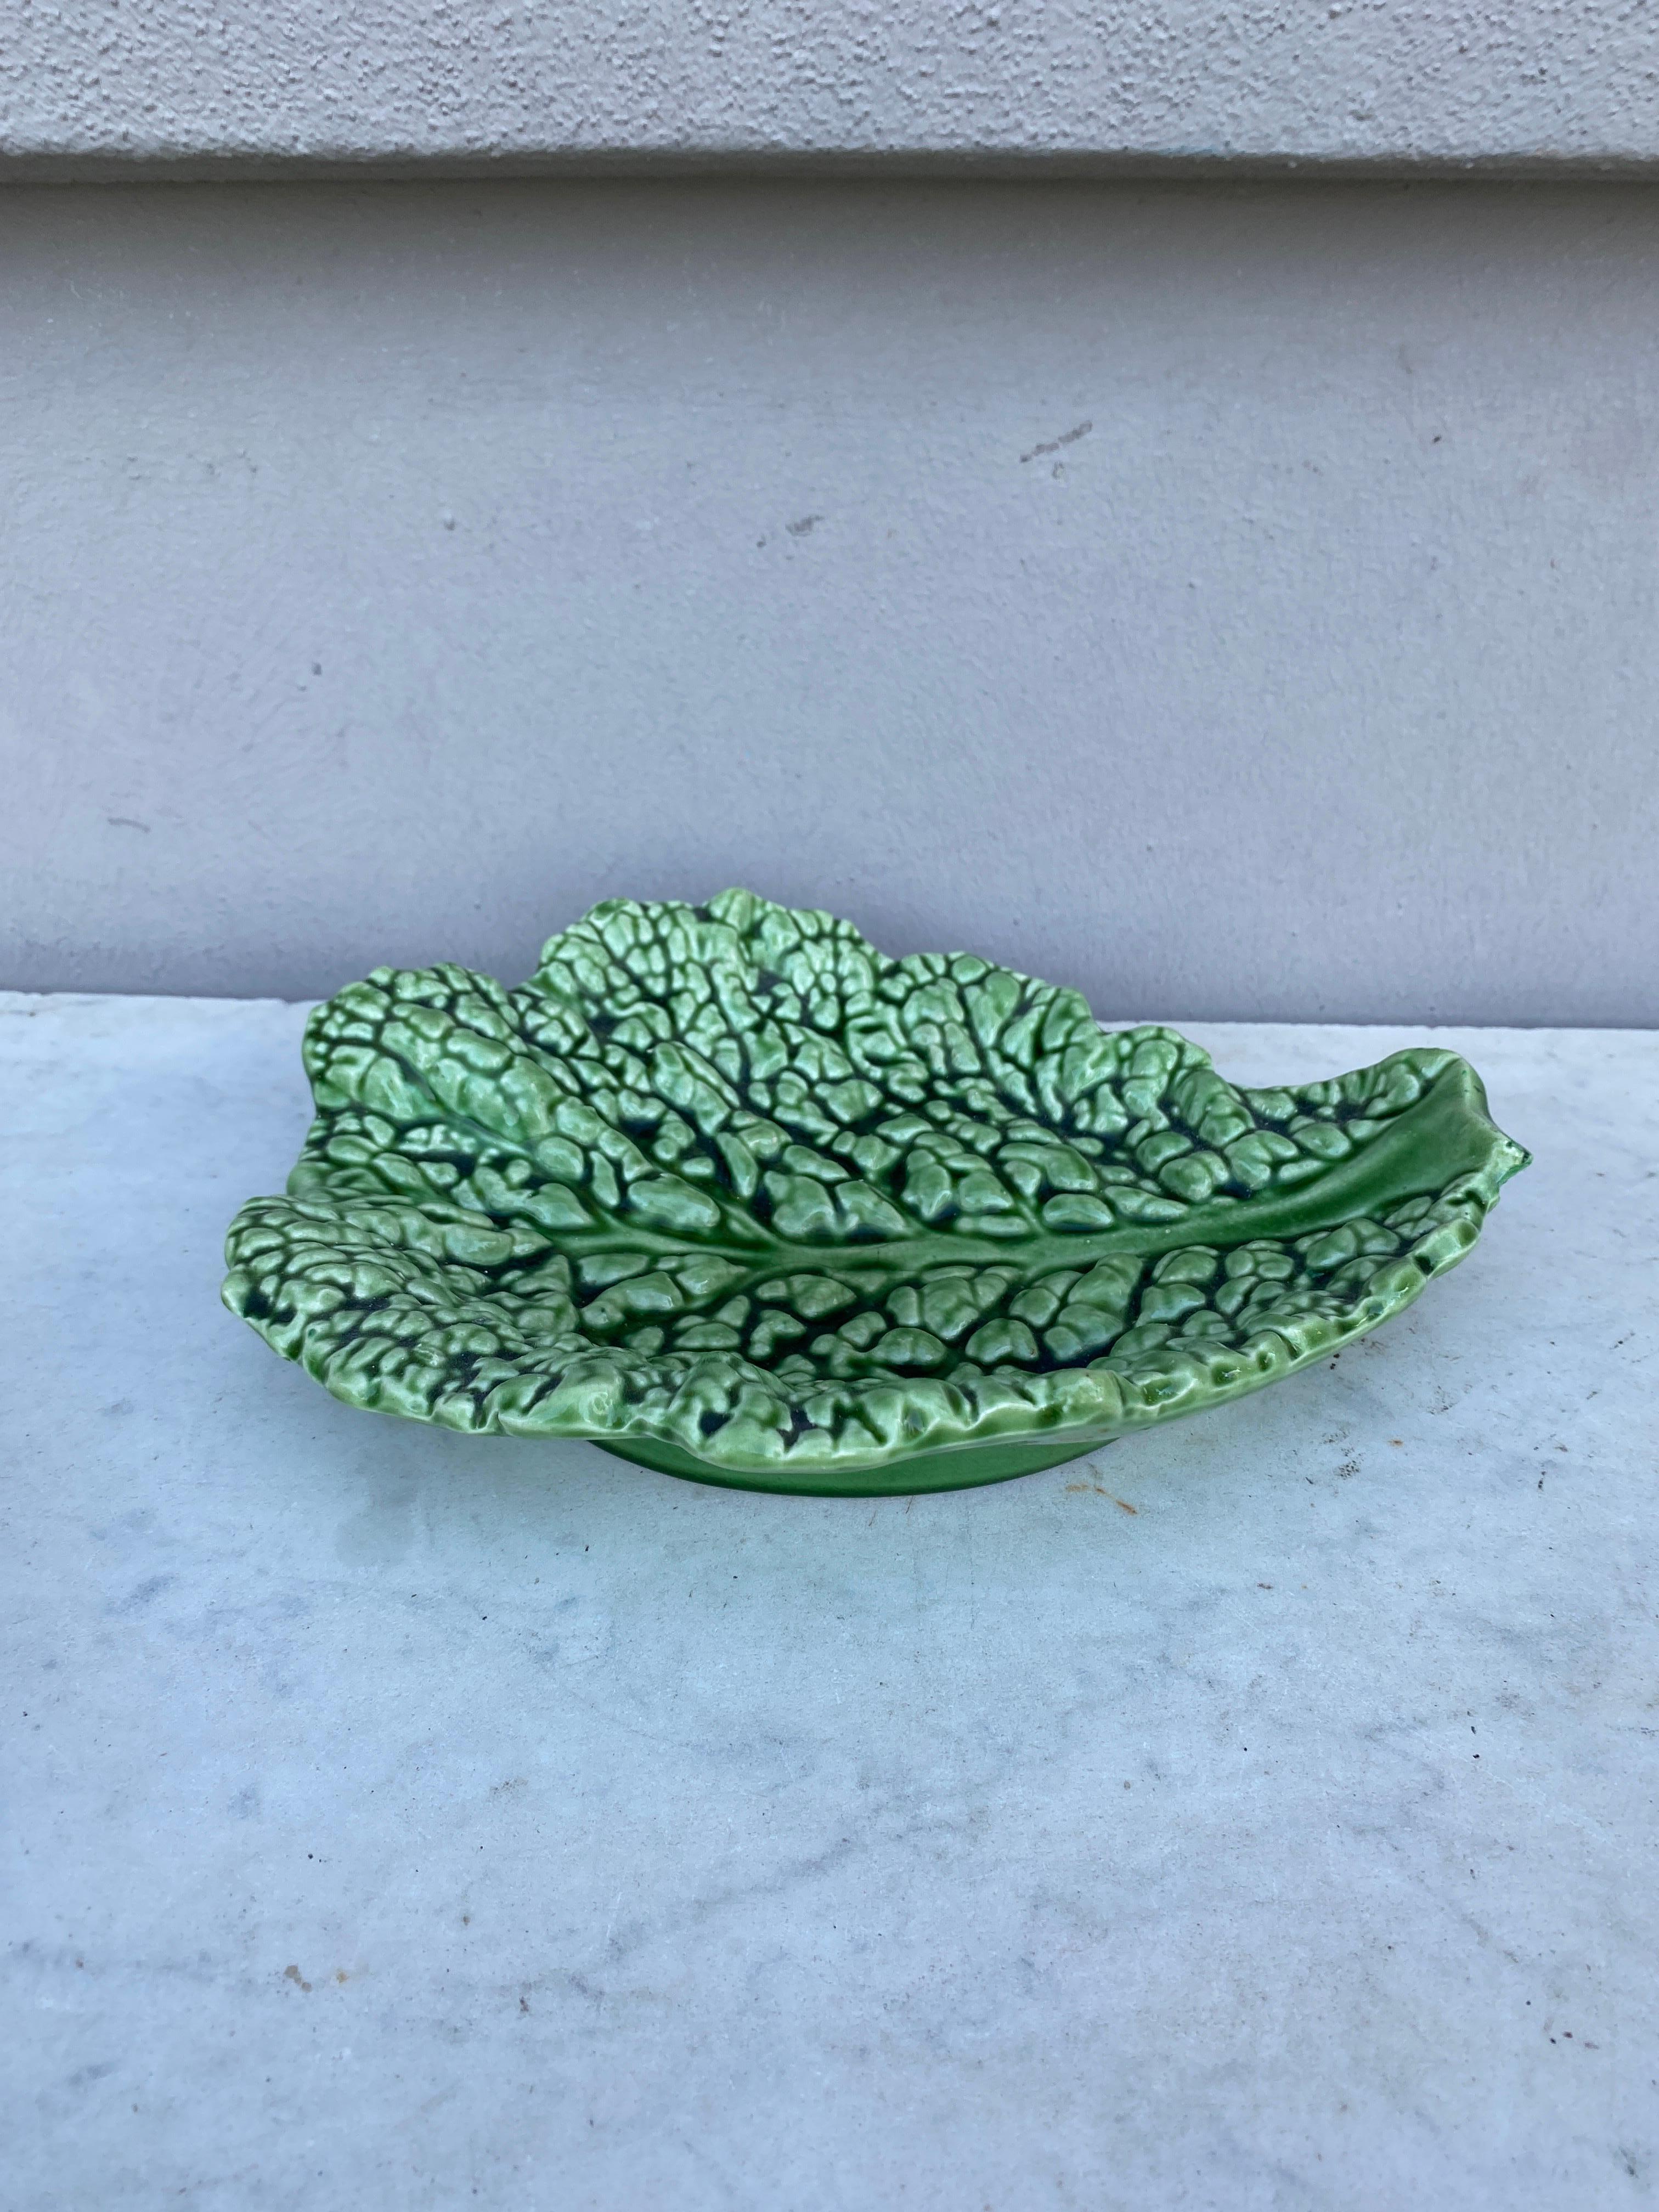 Majolica green cabbage leaf platter Sarreguemines, Circa 1930.
Measures: 10 inches by 7.8 inches.